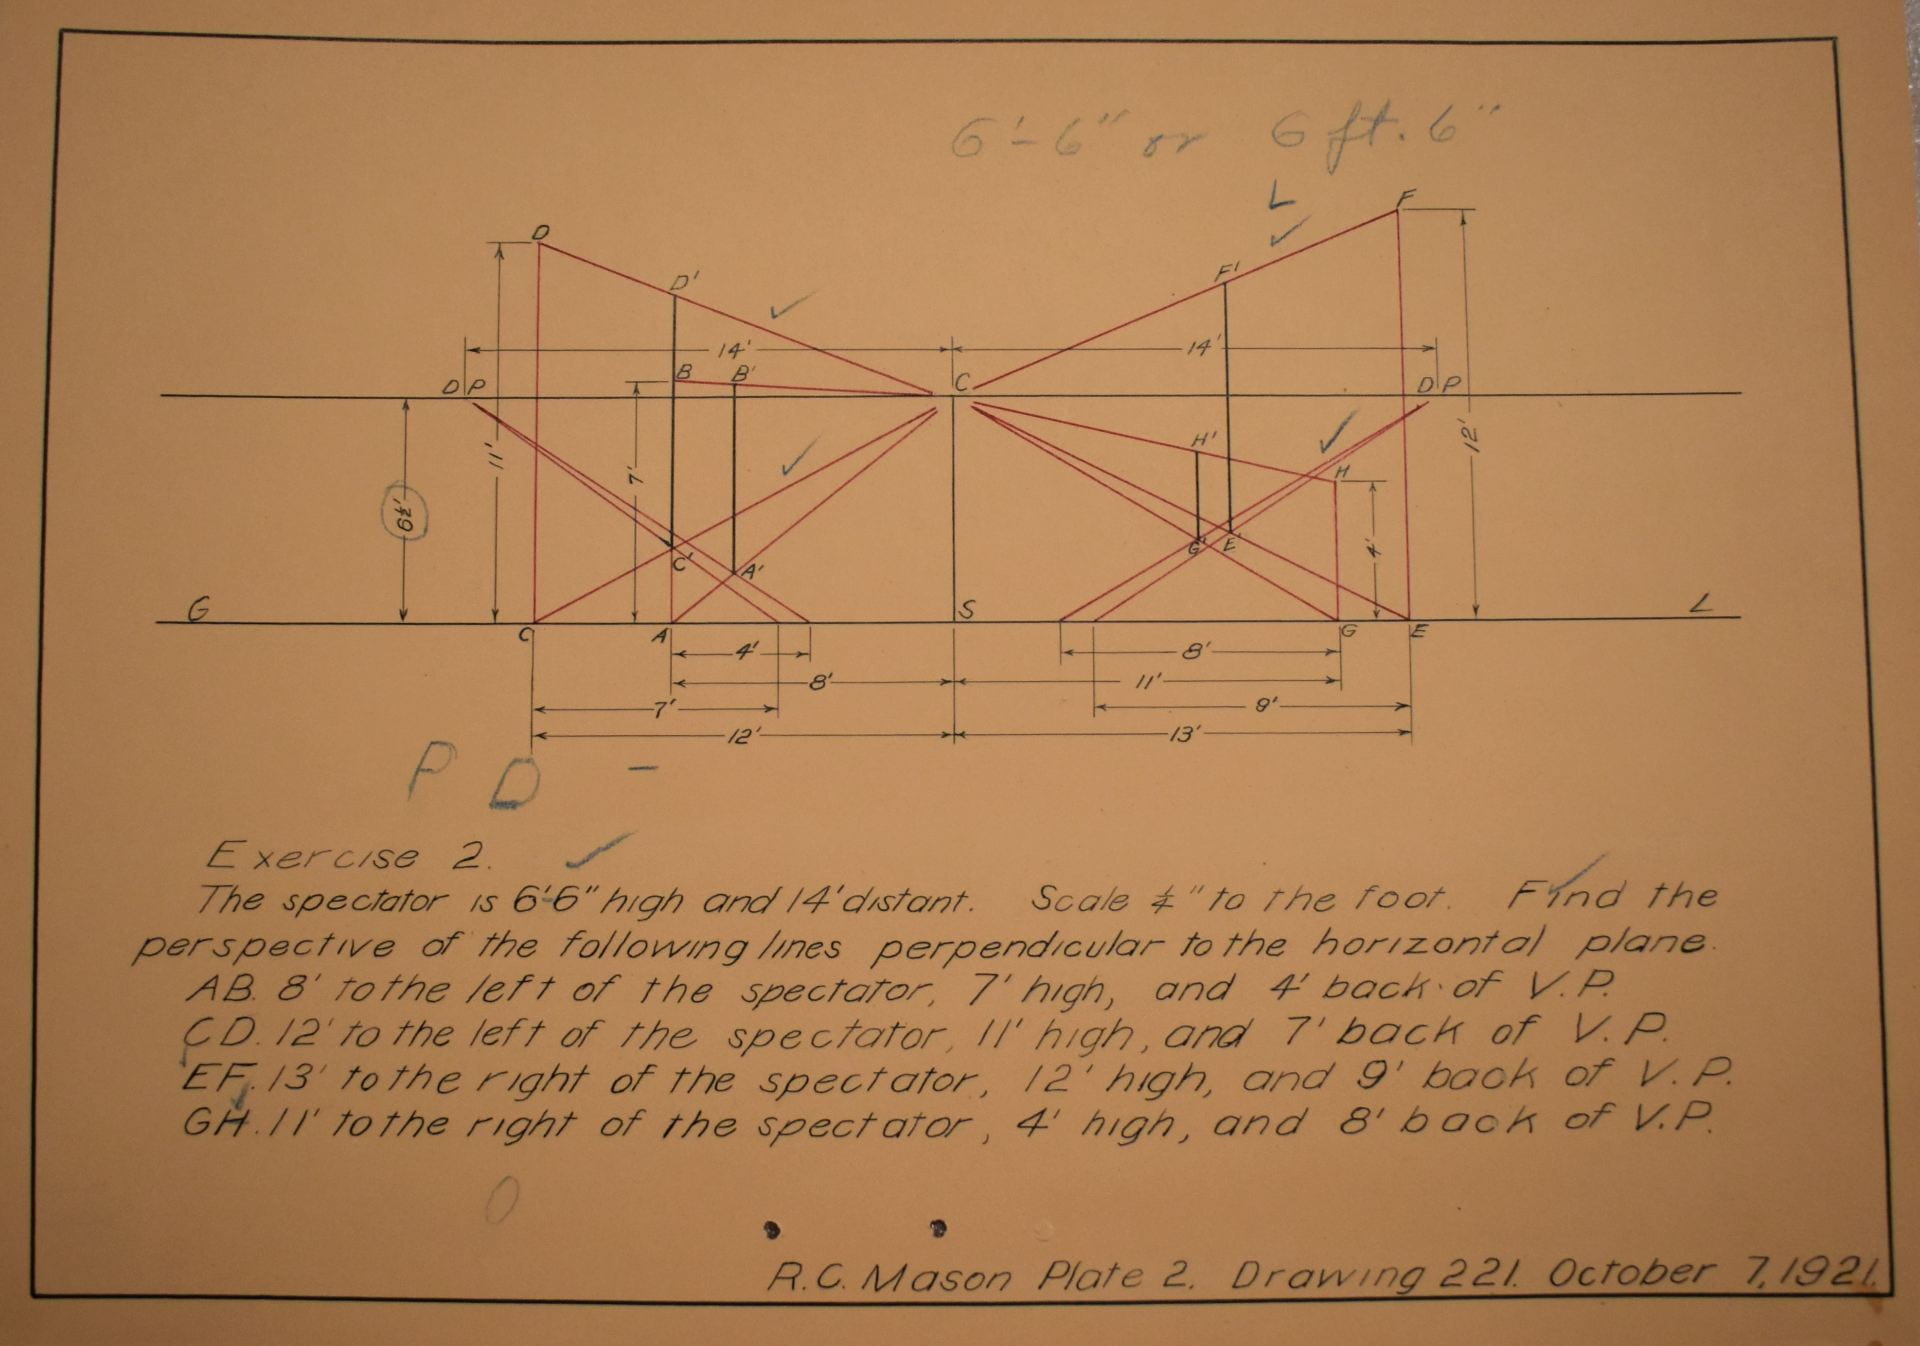 A yellowed document featuring a student assignment. There is an architectural sketch of some sort of building or structure. Underneath is an in-depth description of measurements for the drawing. In bottom right corner are the words "R.C. Mason, Plate 2, Drawing 221, October 7 1921."